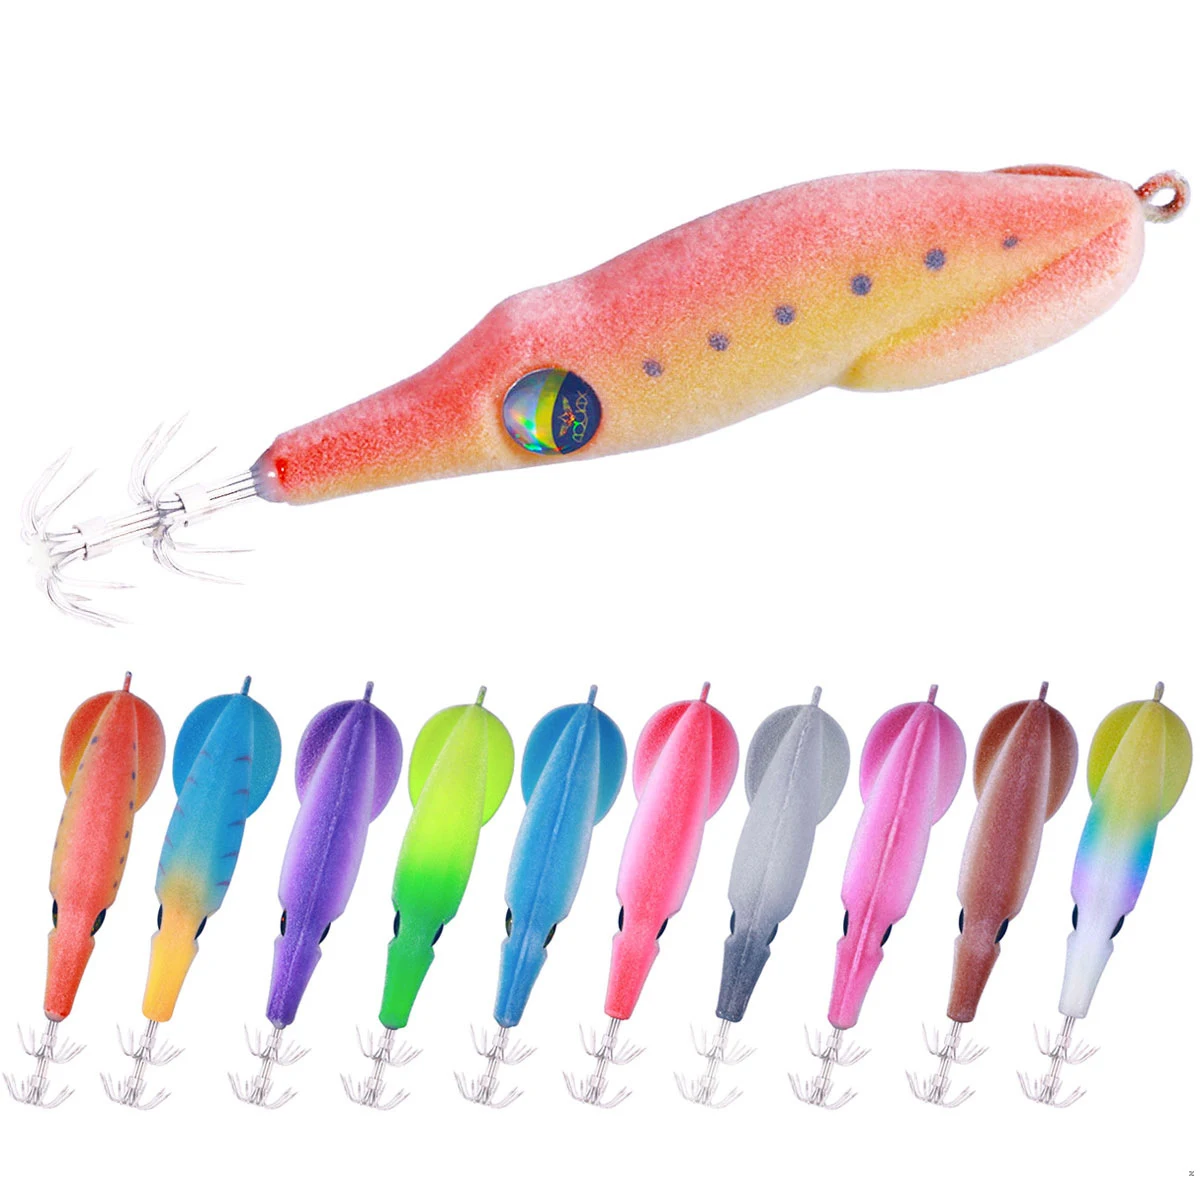 

1 PC 9.5cm 6g Wood Shrimp Lures Cuttlefish Jigging Squid Hook Artificial Bait For Sea Fishing Octopus Squid Jig Fishing Lures